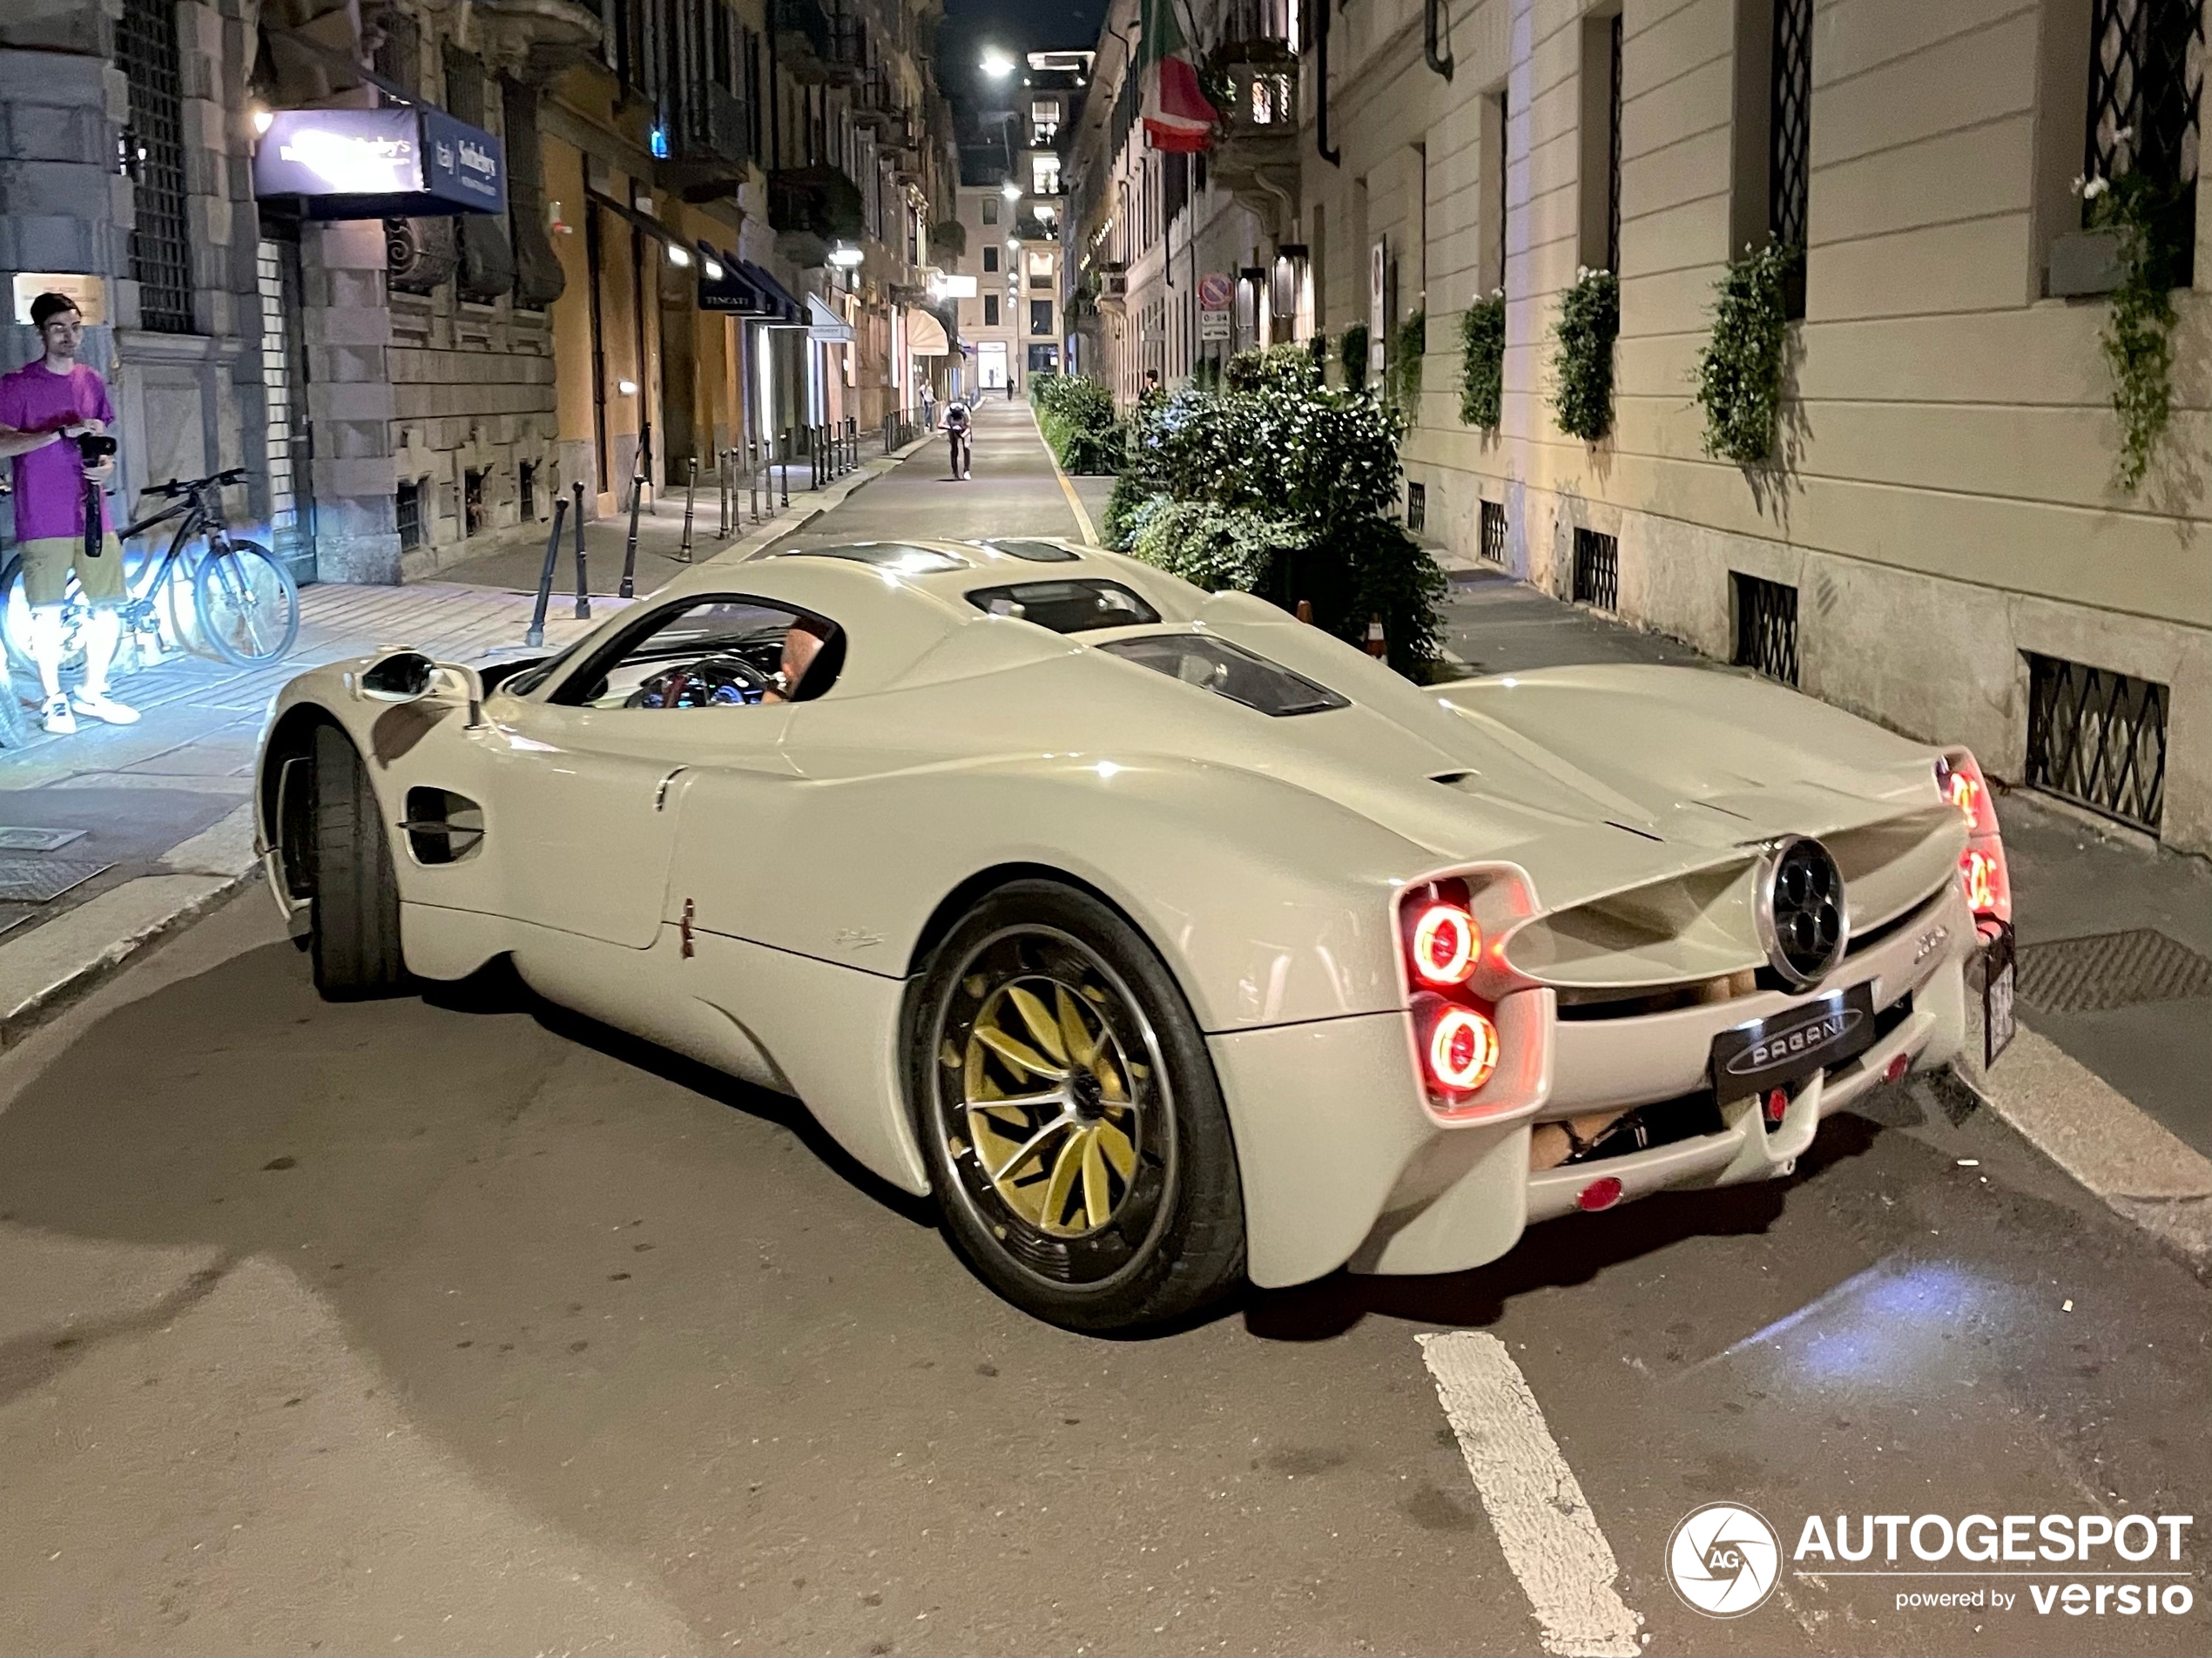 A Pagani Utopia shows up in Northern Italy